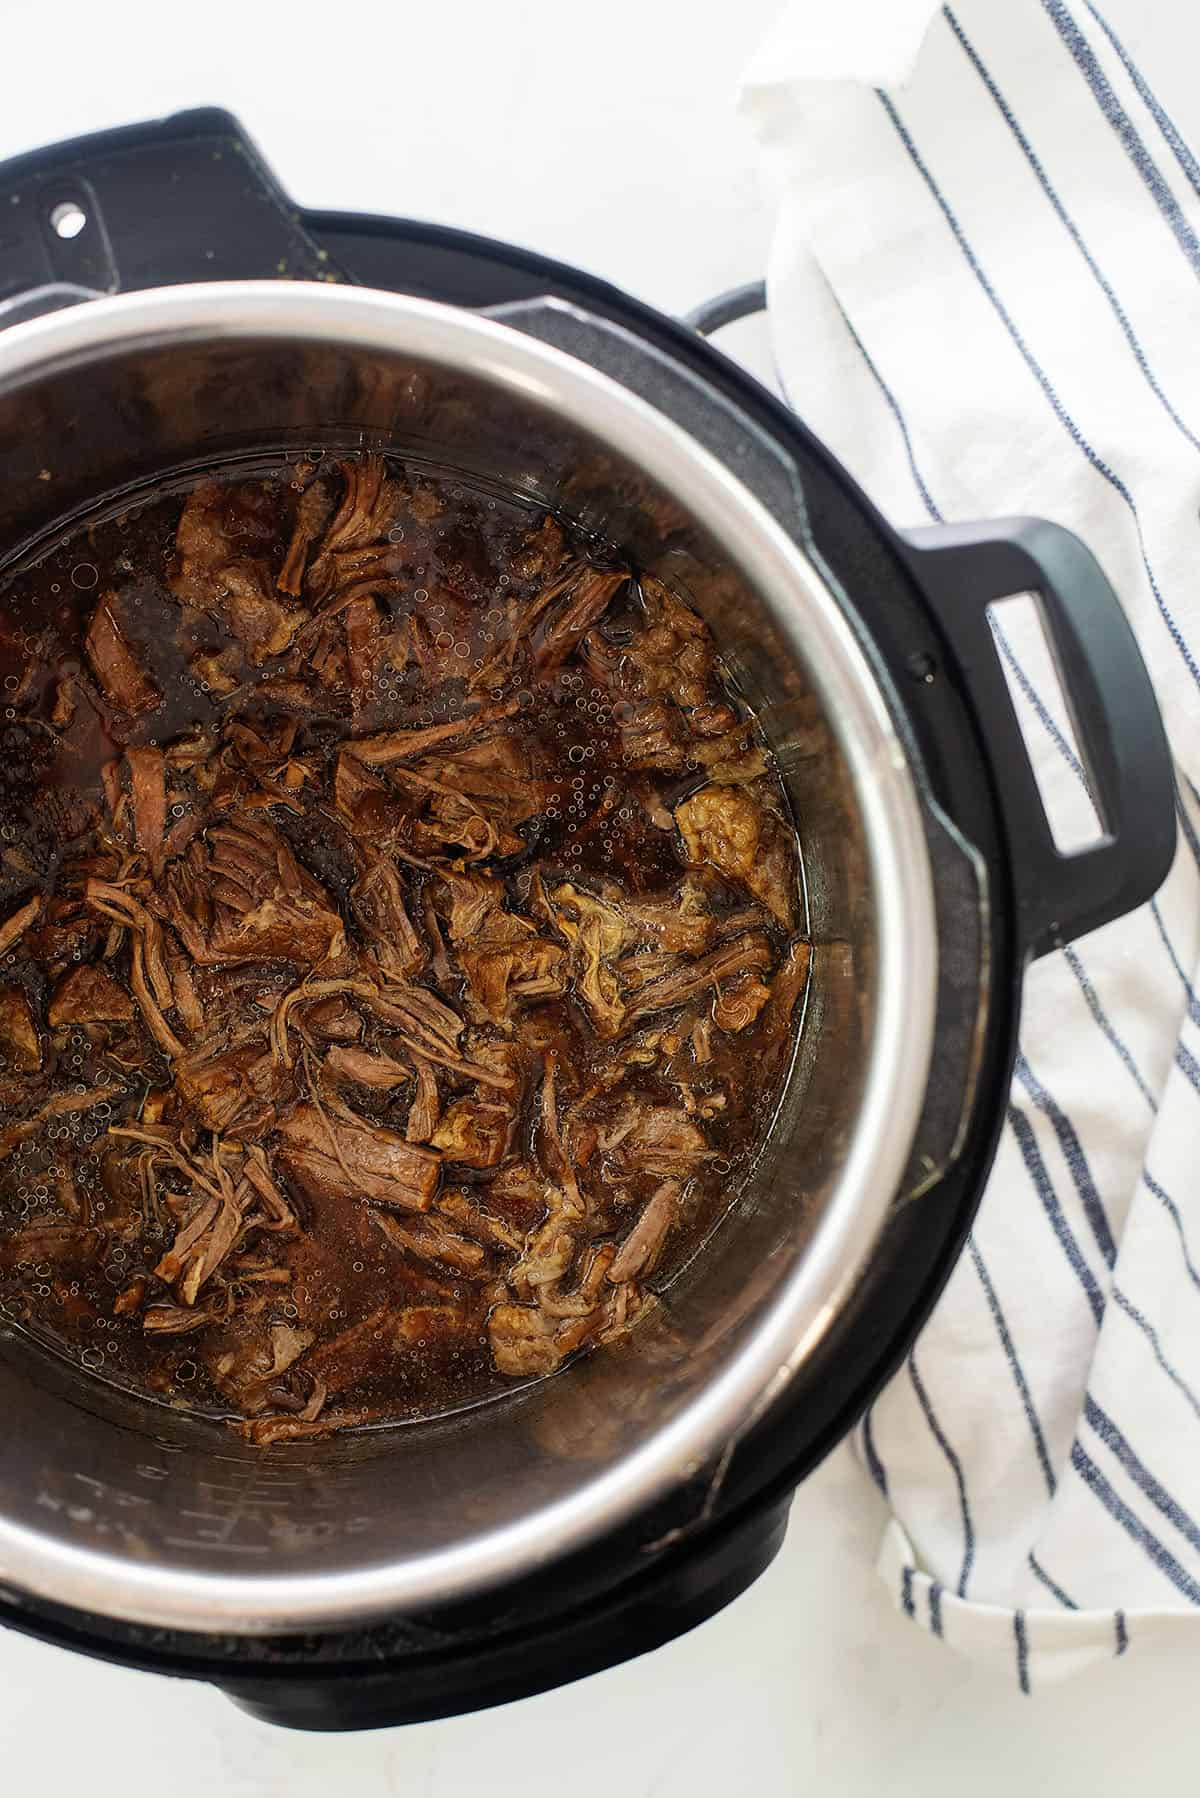 Shredded beef in Instant Pot.